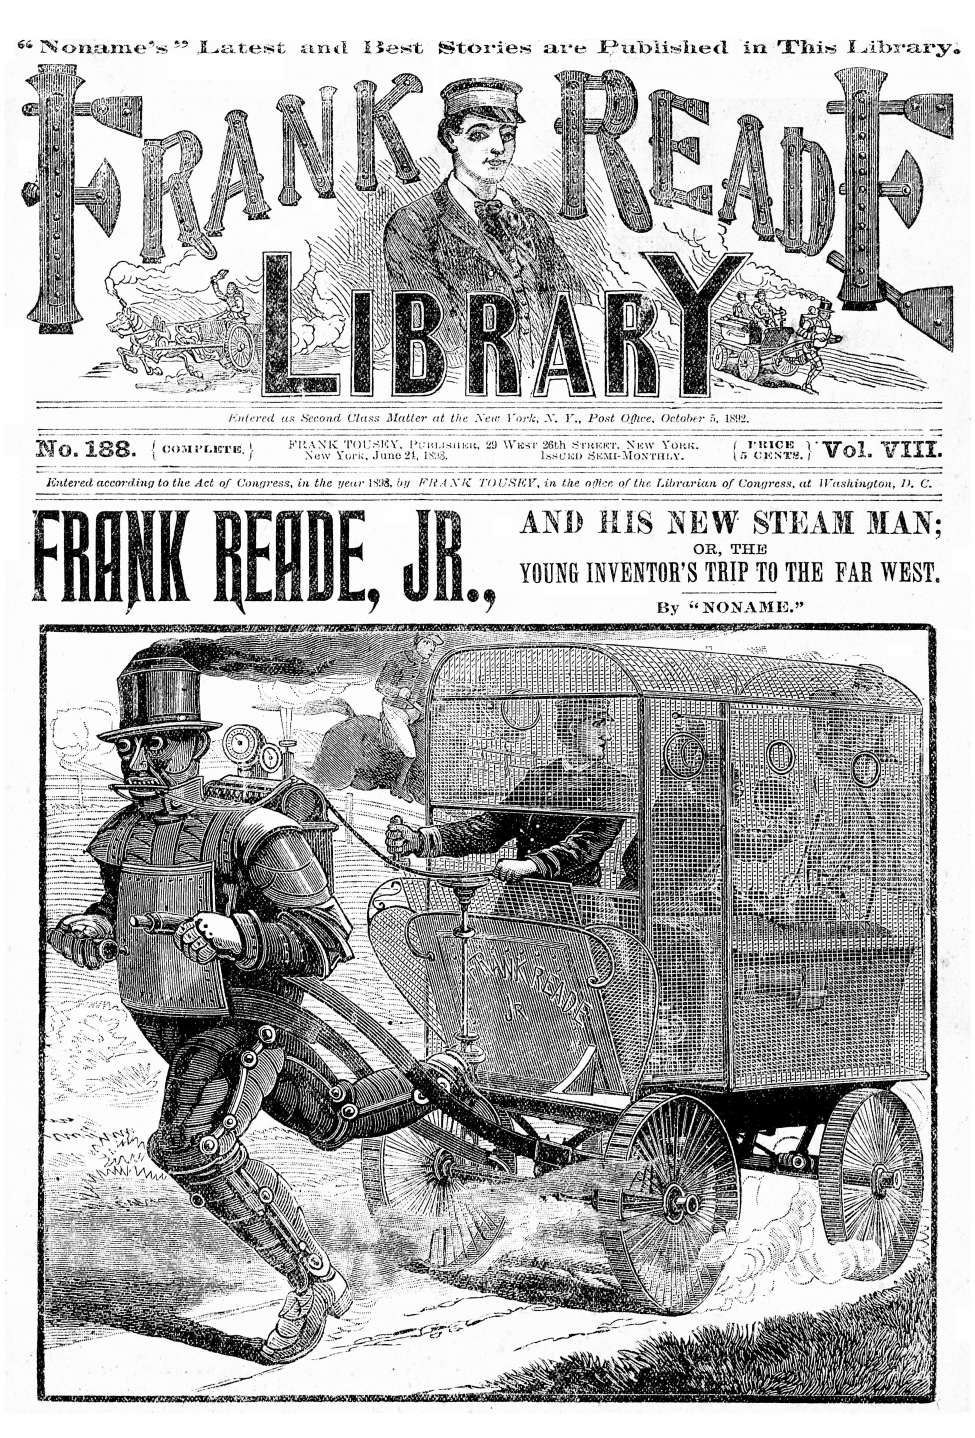 Book Cover For v08 188 - Frank Reade Jr. and His New Steam Man